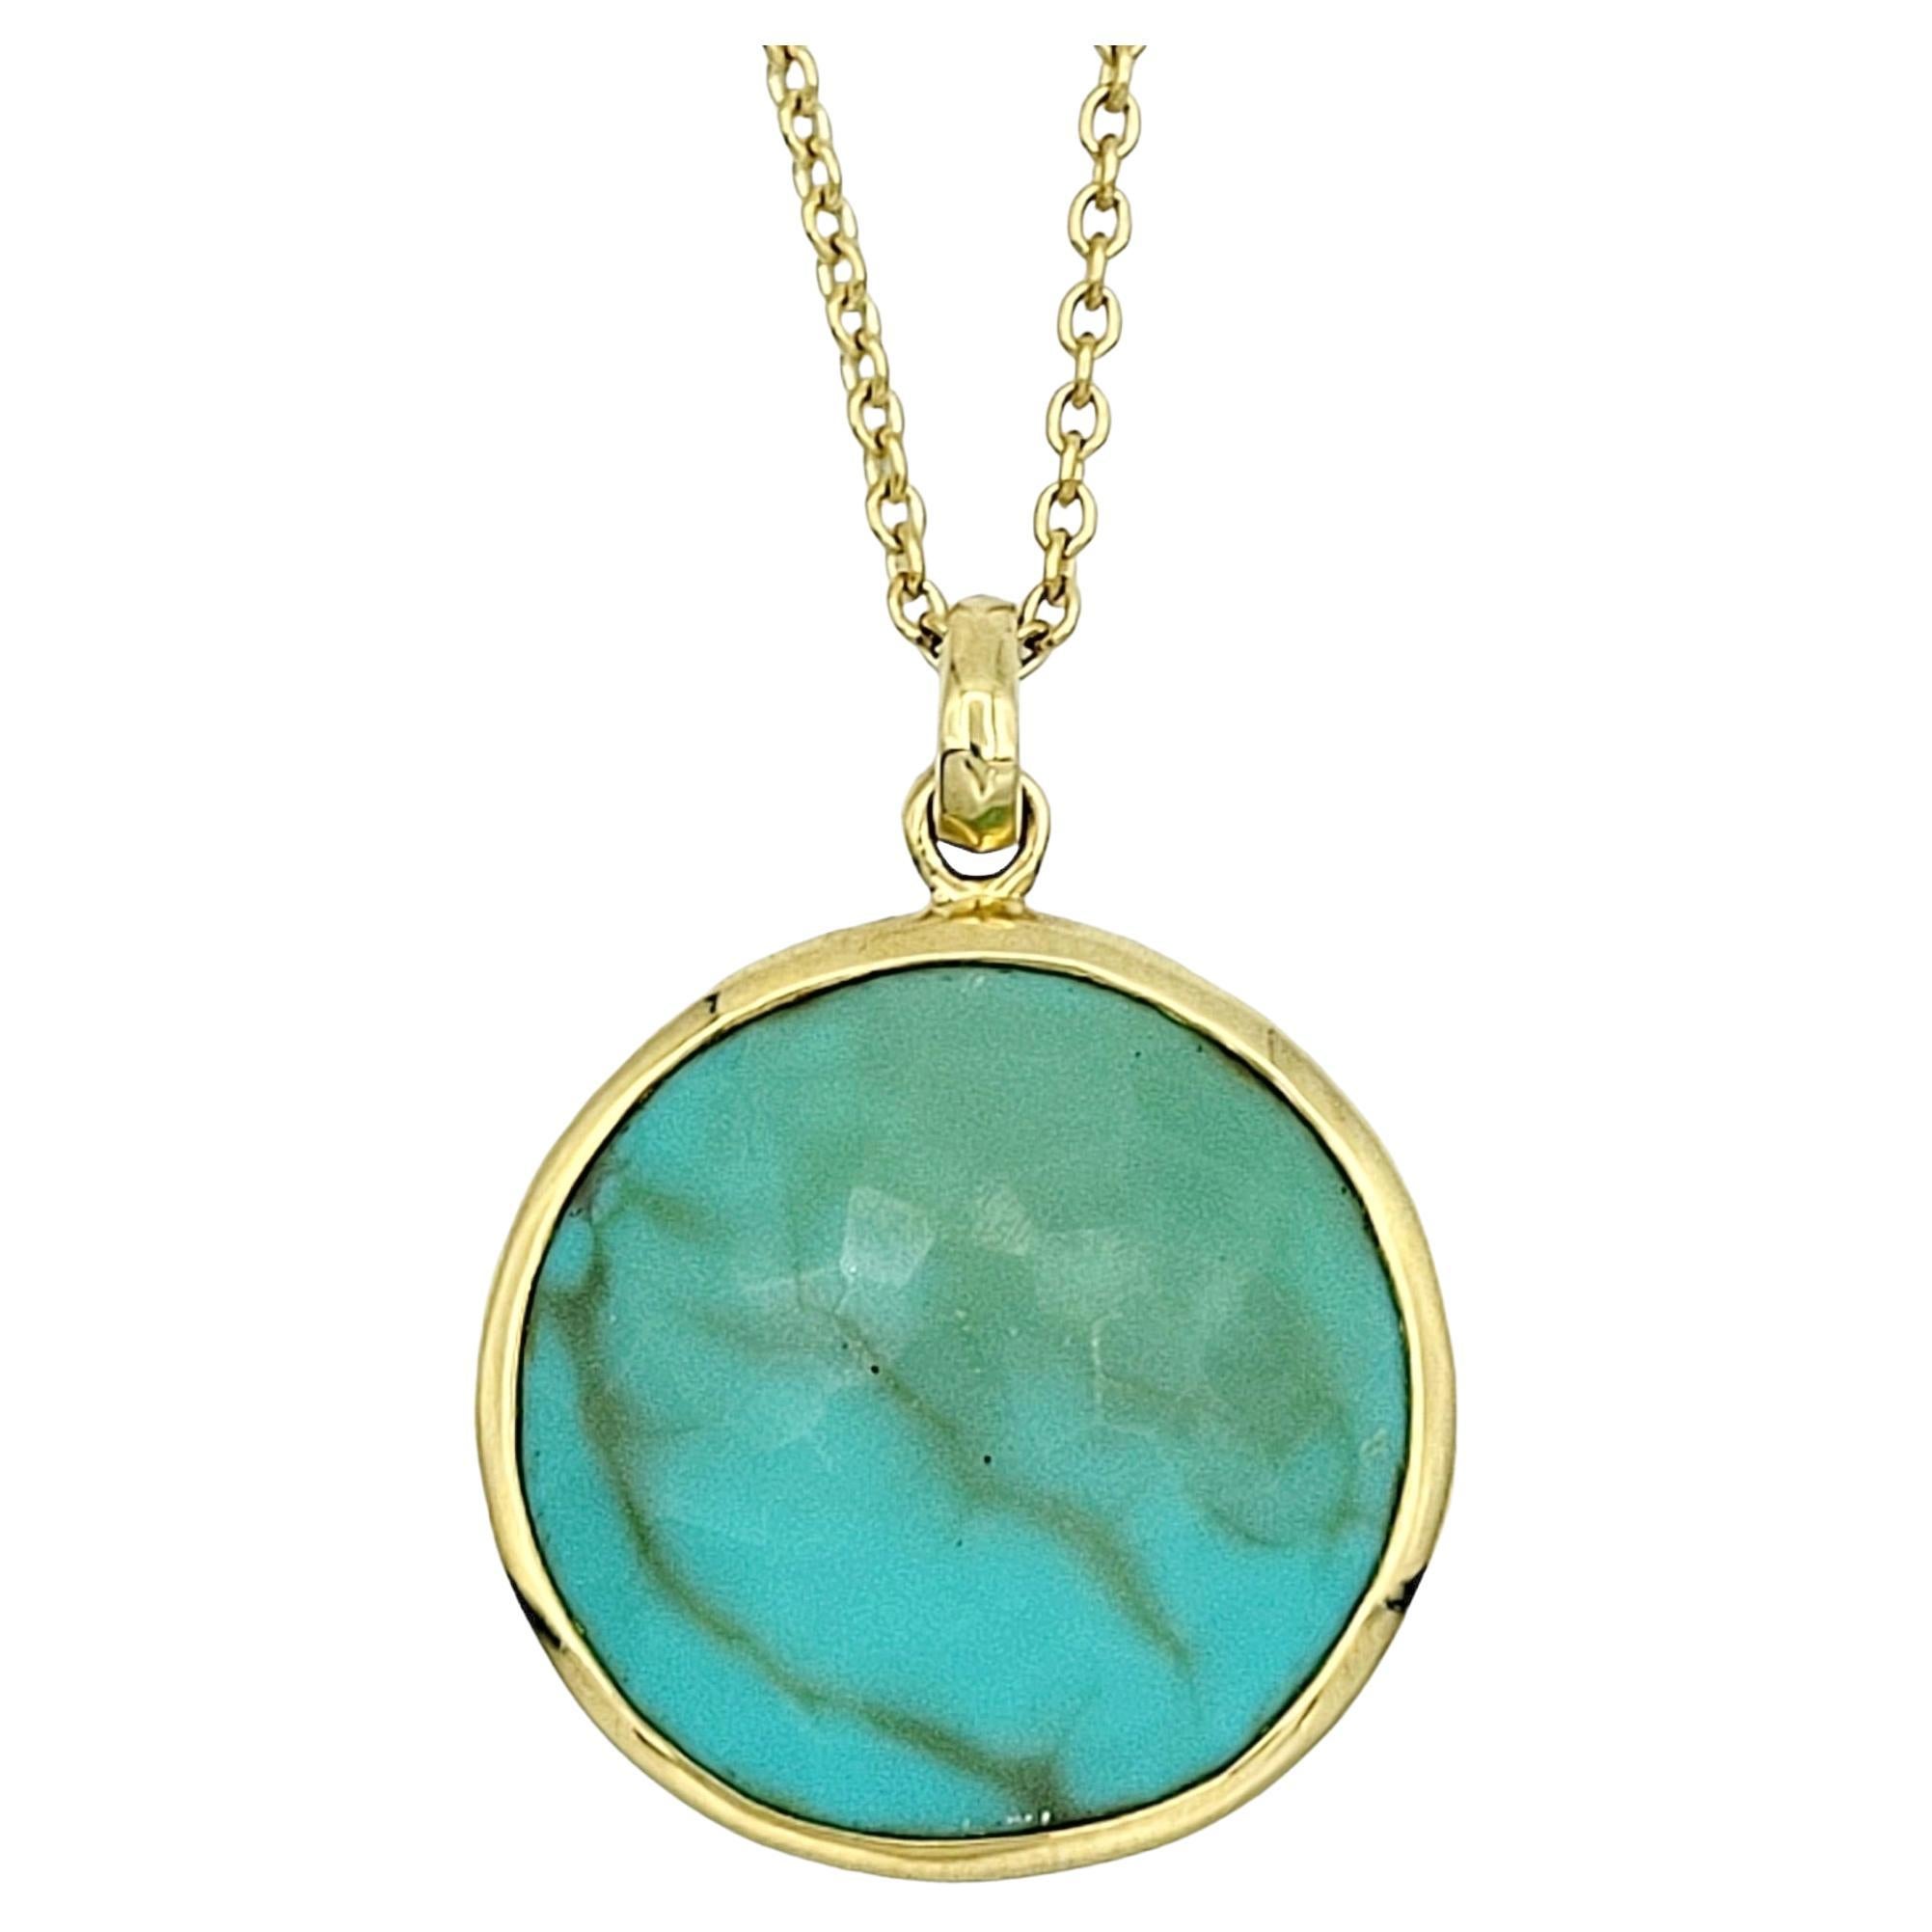 Ippolita Lollipop Medium Solitaire Turquoise Pendant Necklace in 18K Yellow Gold For Sale